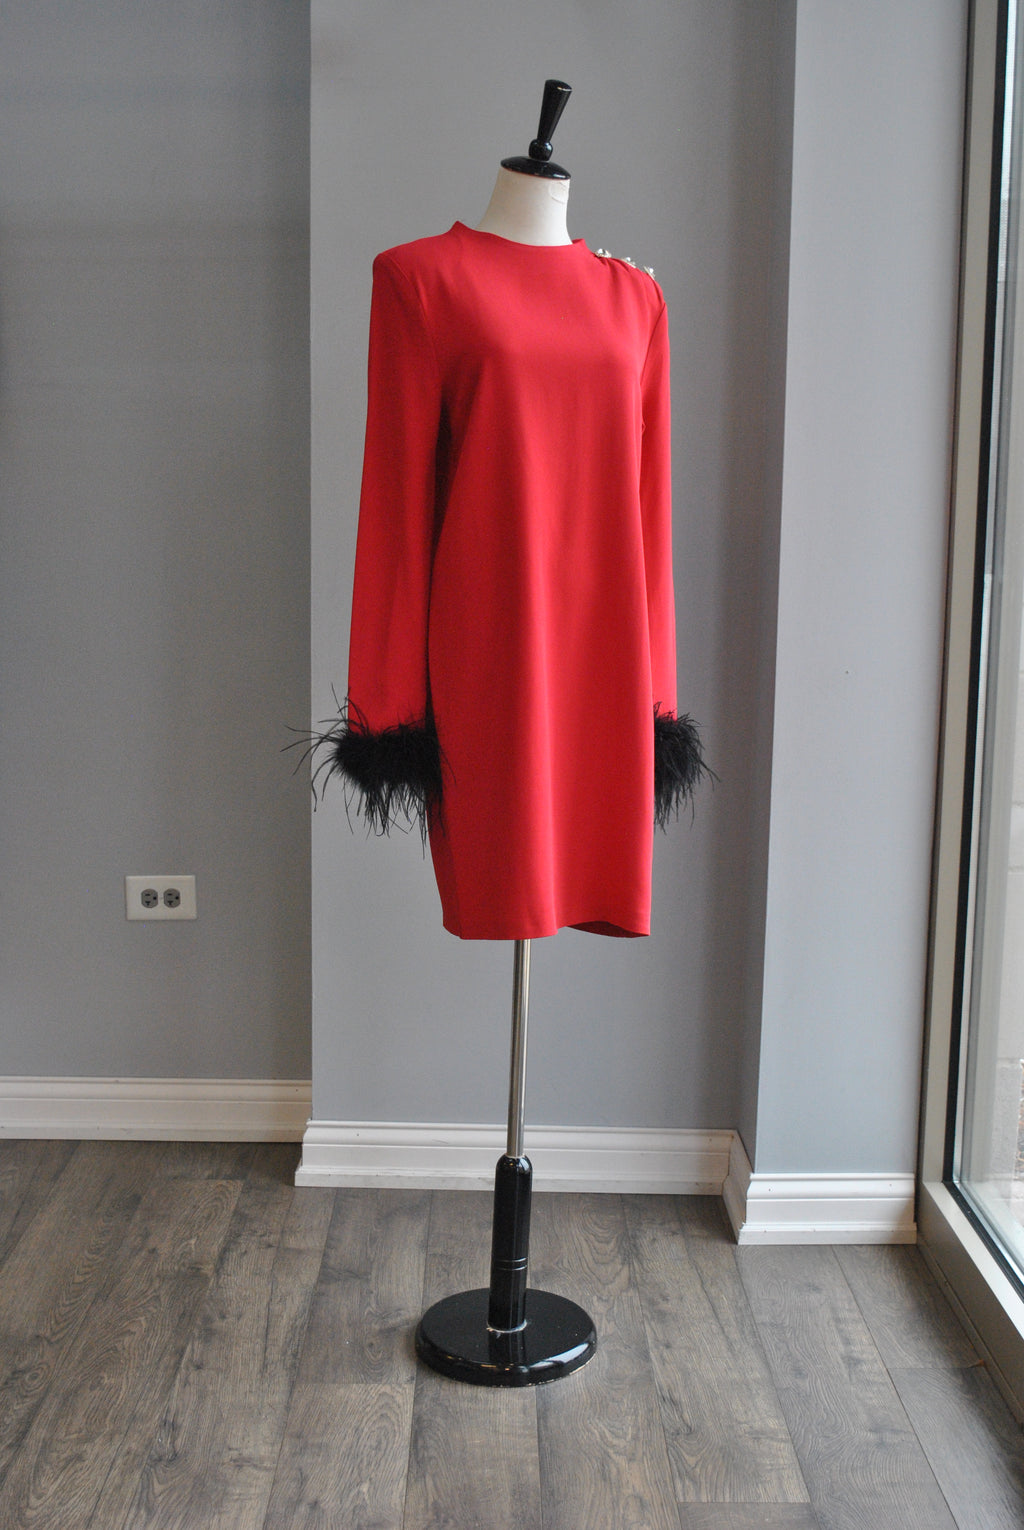 CLEARANCE - RED TUNIC DRESS WITH FEATHERS AND CRYSTAL DETAILS